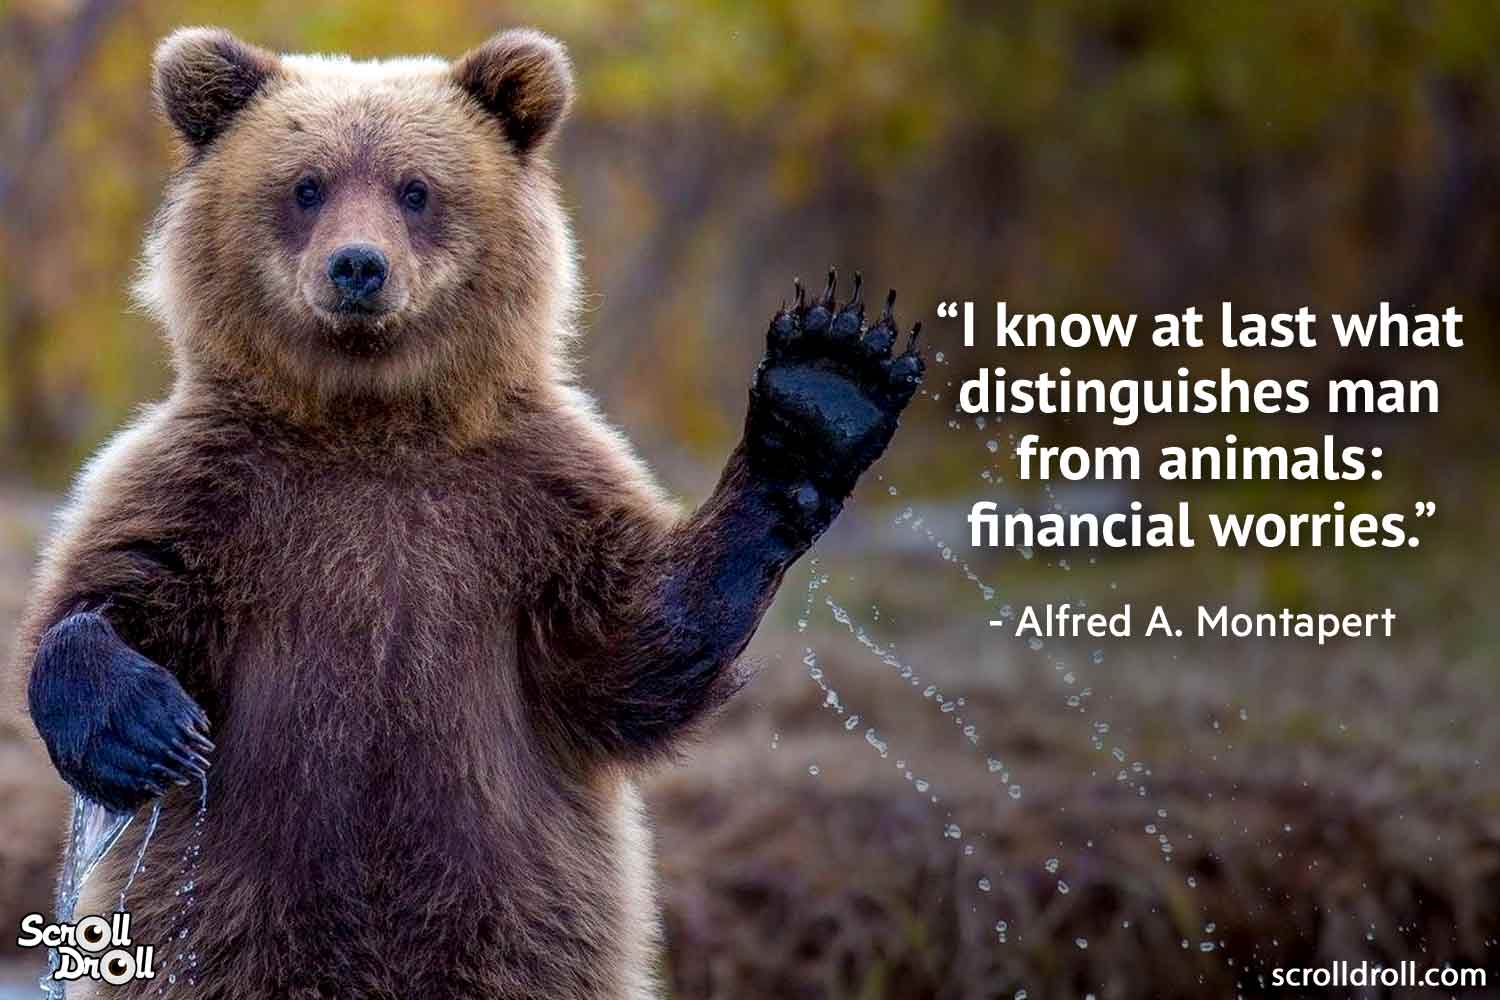 quotes-on-animals-by-famous-people-11 - Pop Culture, Entertainment, Humor,  Travel & More